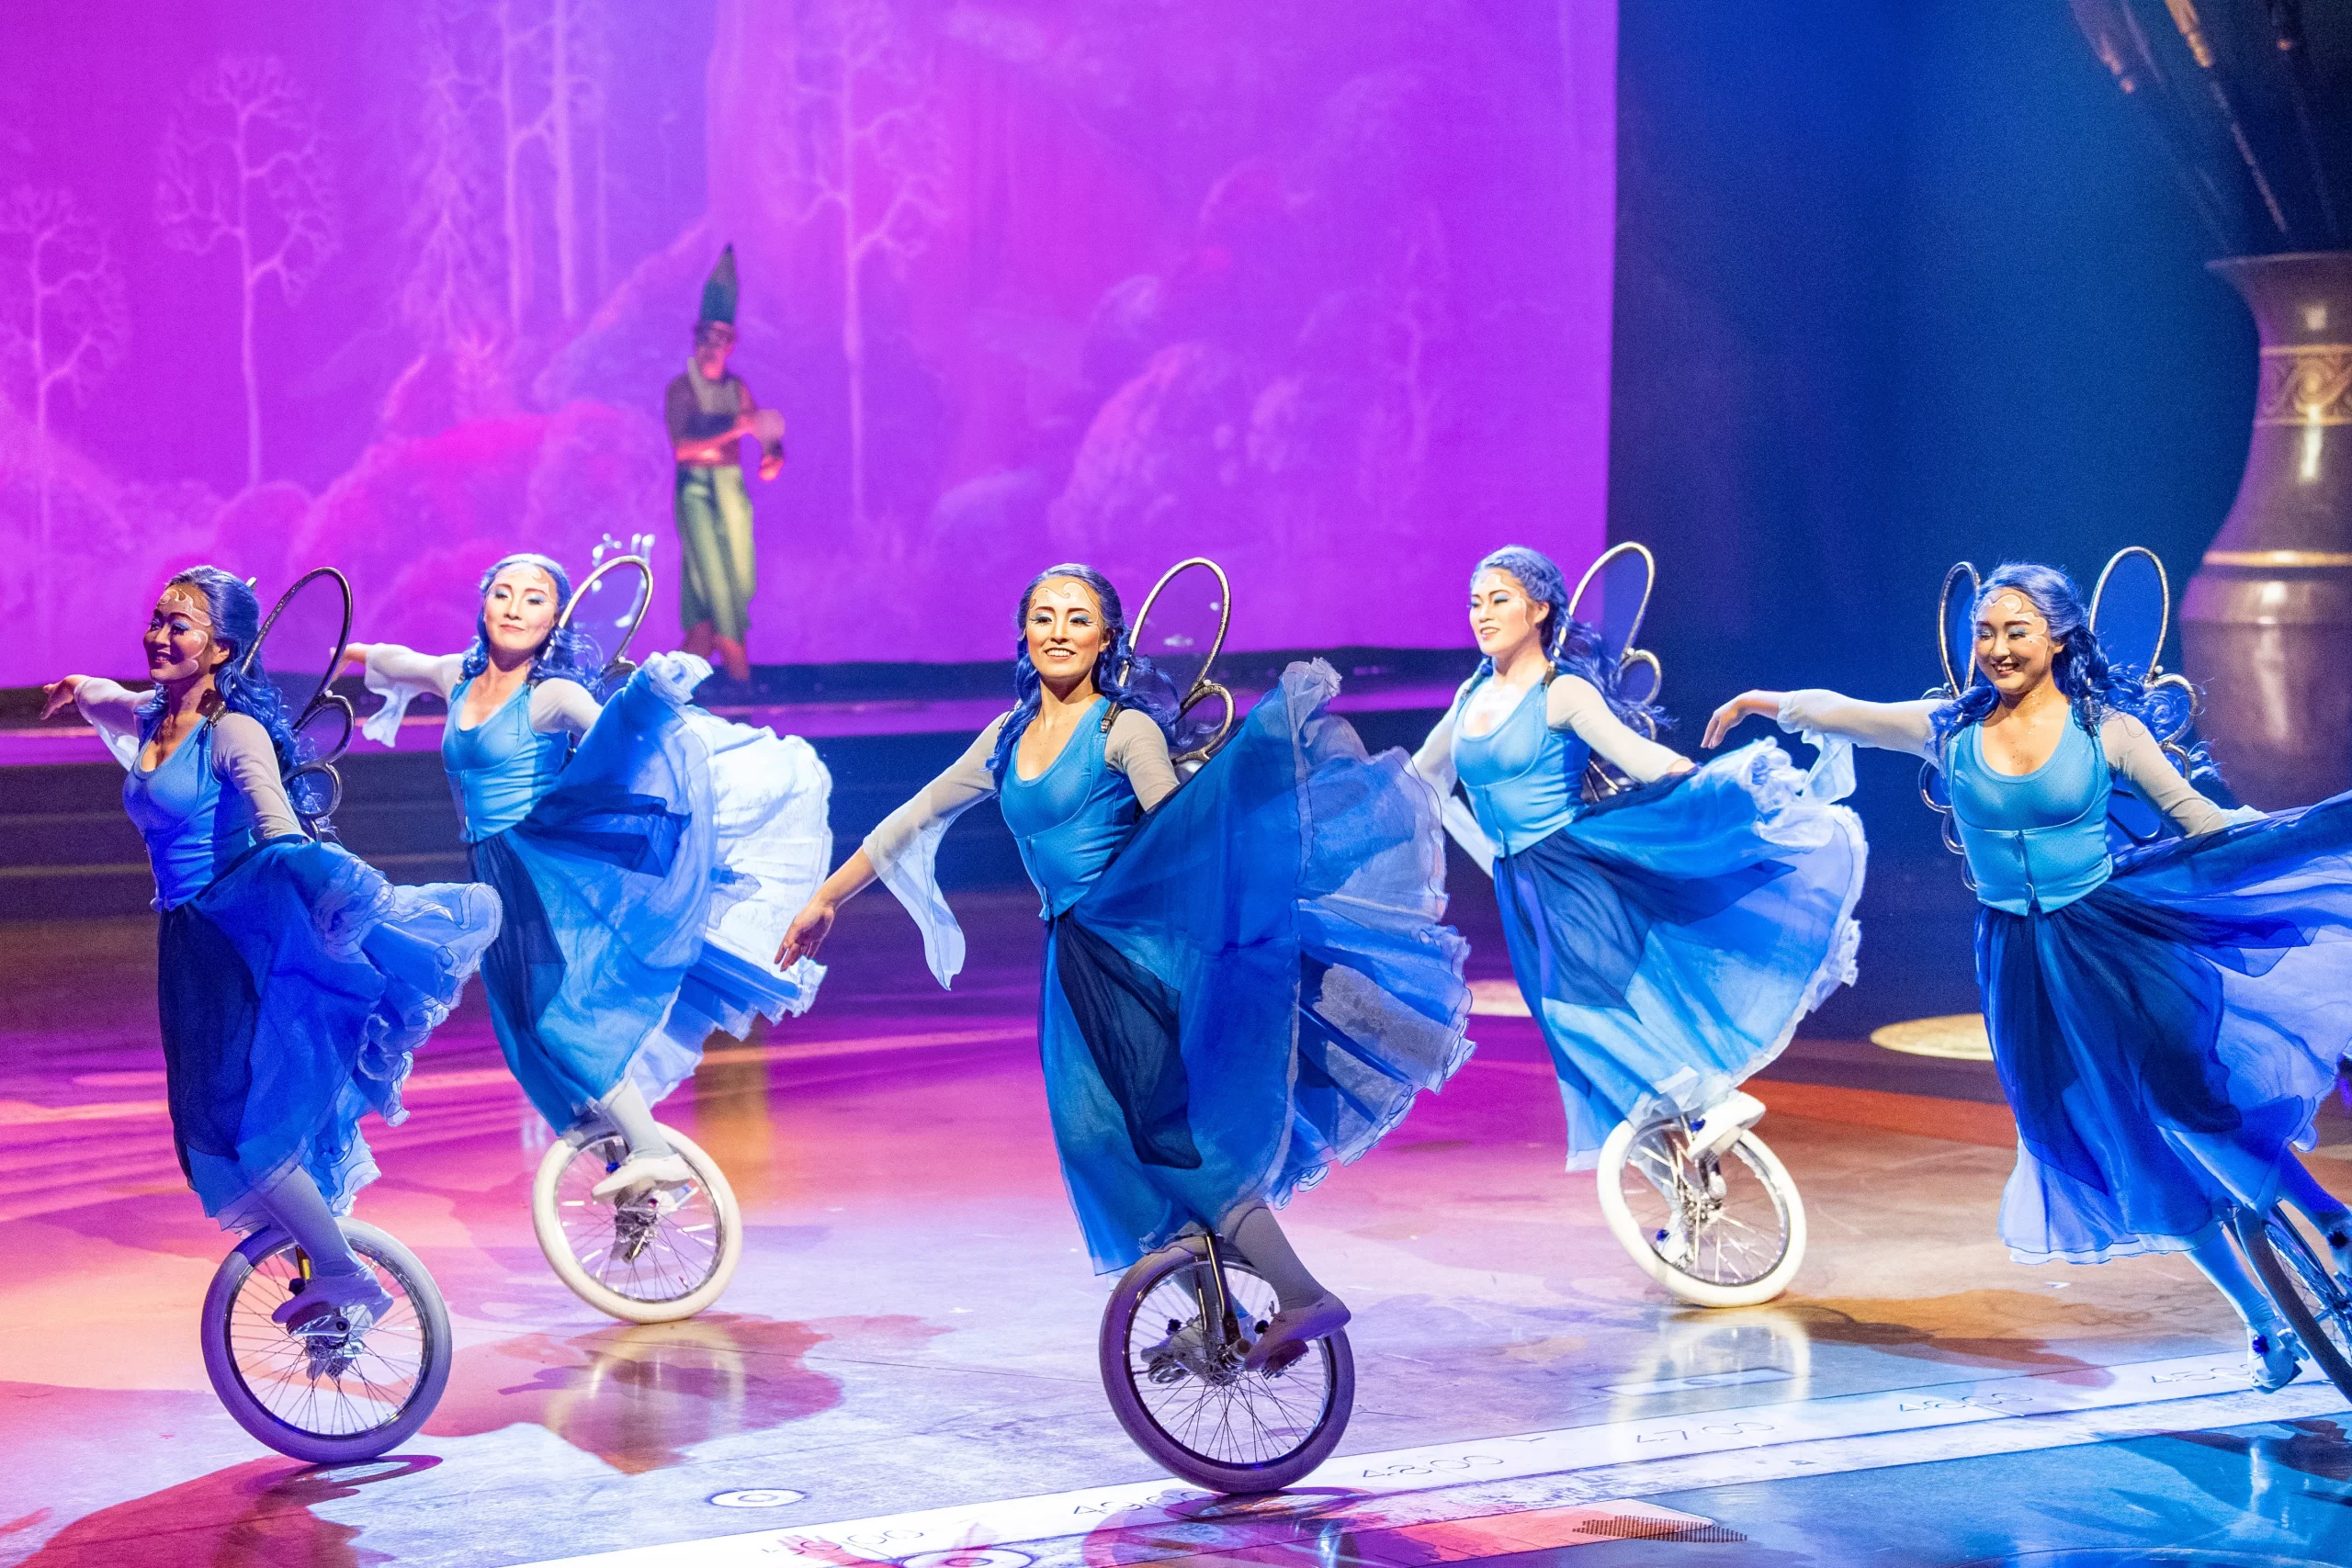 Drawn to Life blue fairy unicycle act